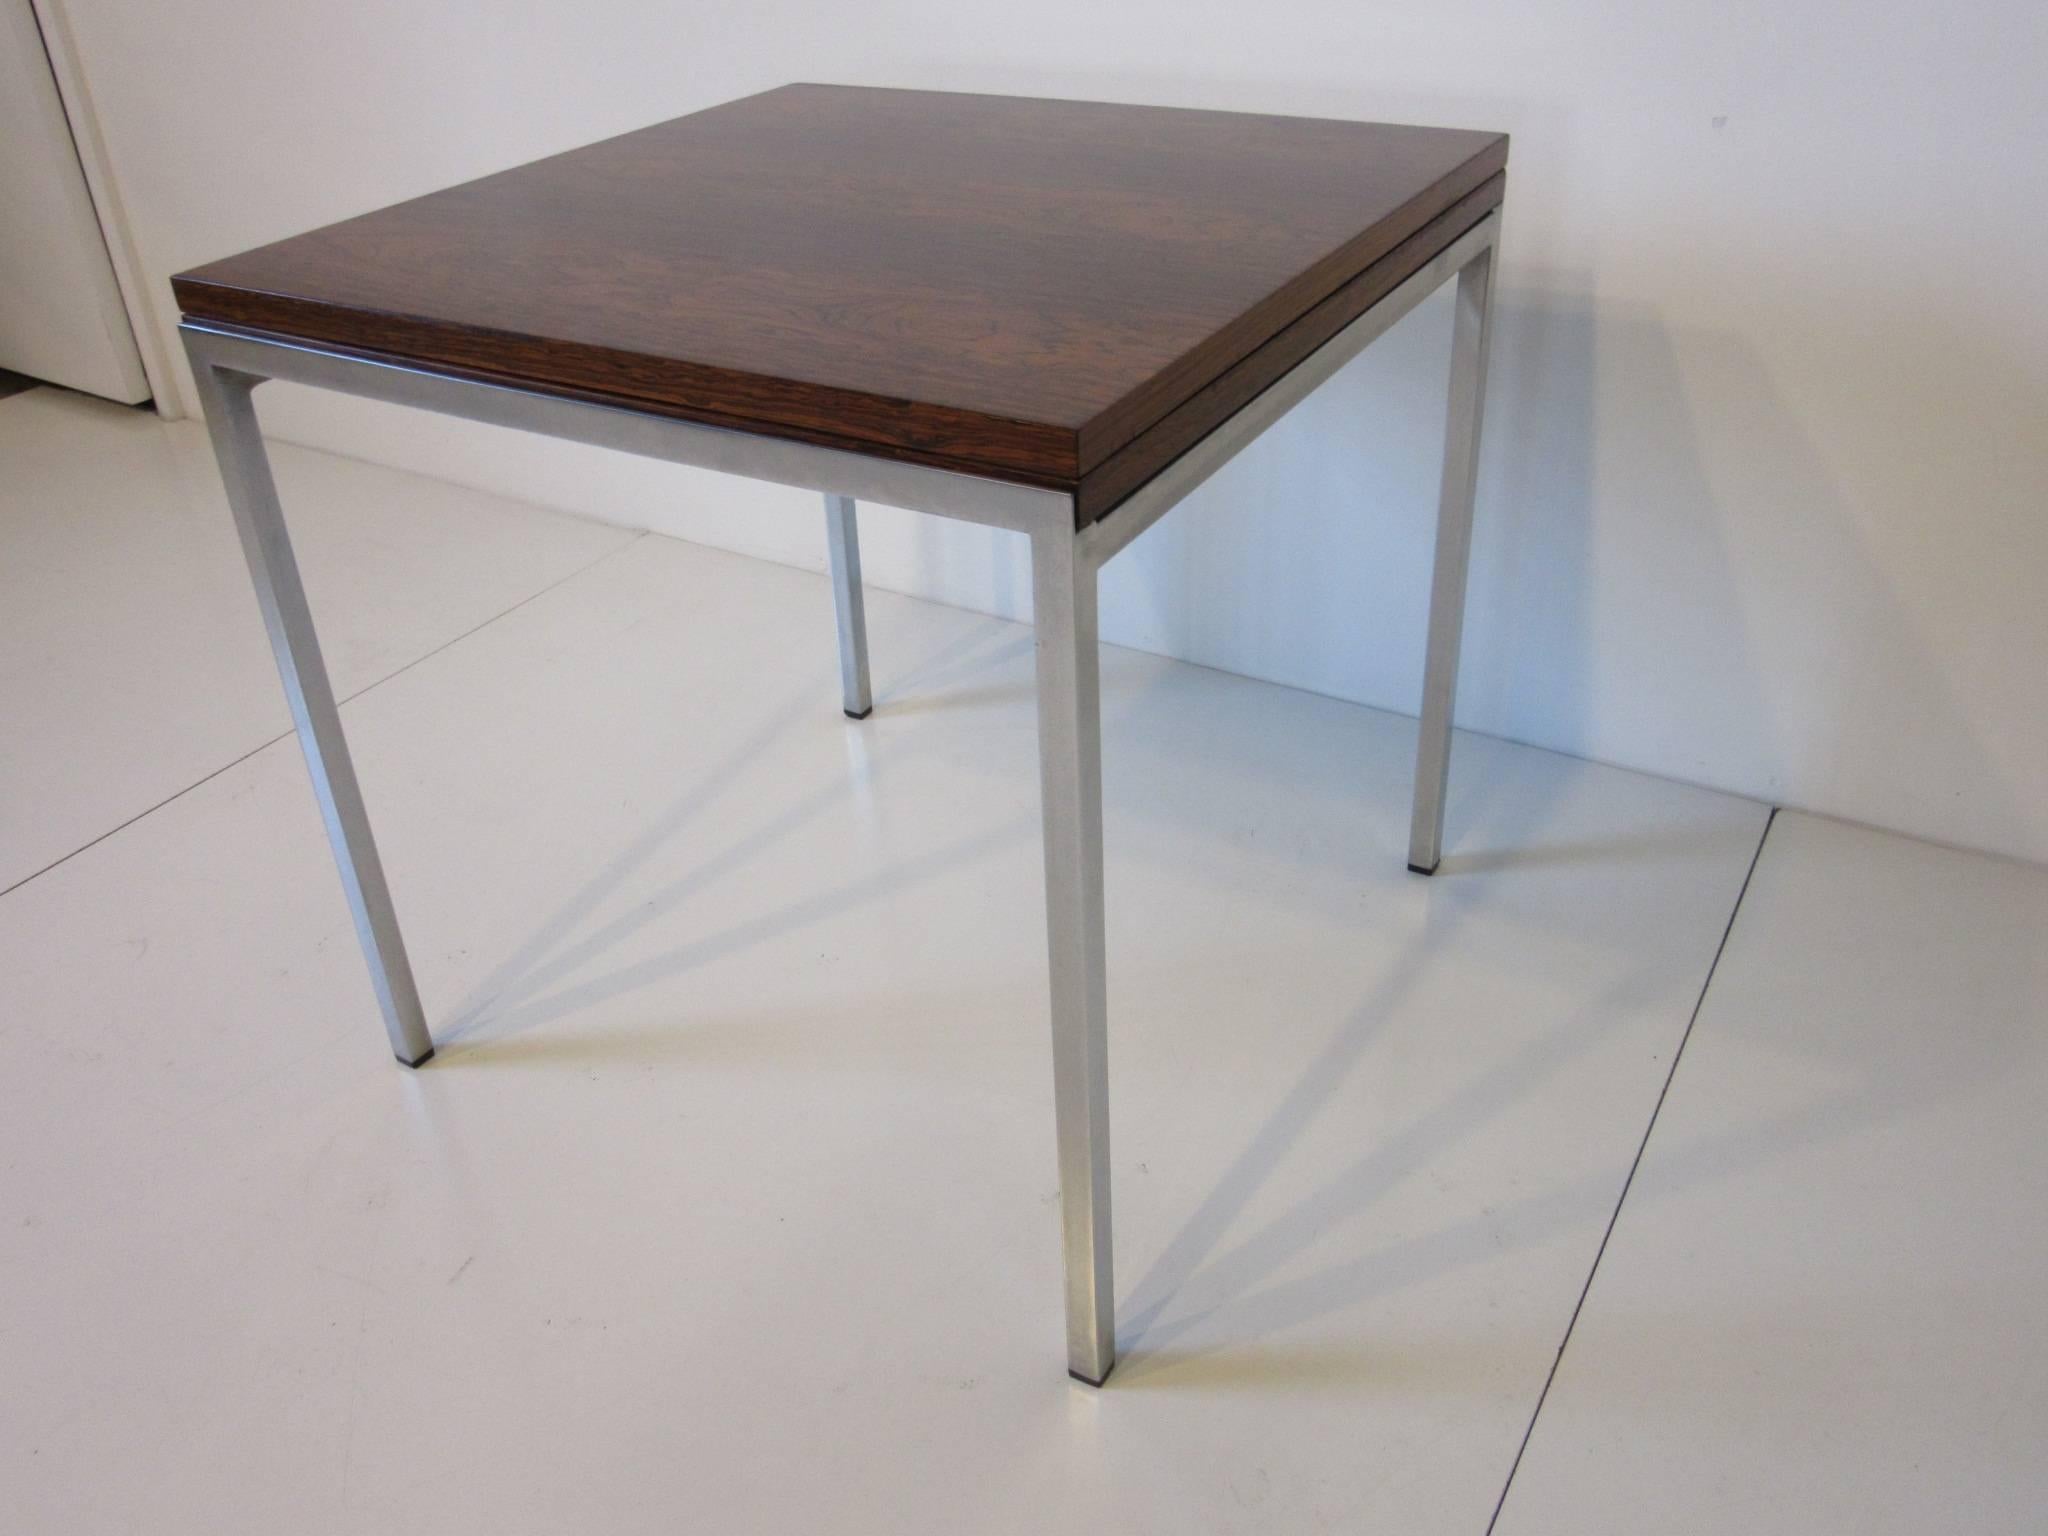 Brazilian Rosewood Flip Top Side Table or Coffee Table In Good Condition For Sale In Cincinnati, OH